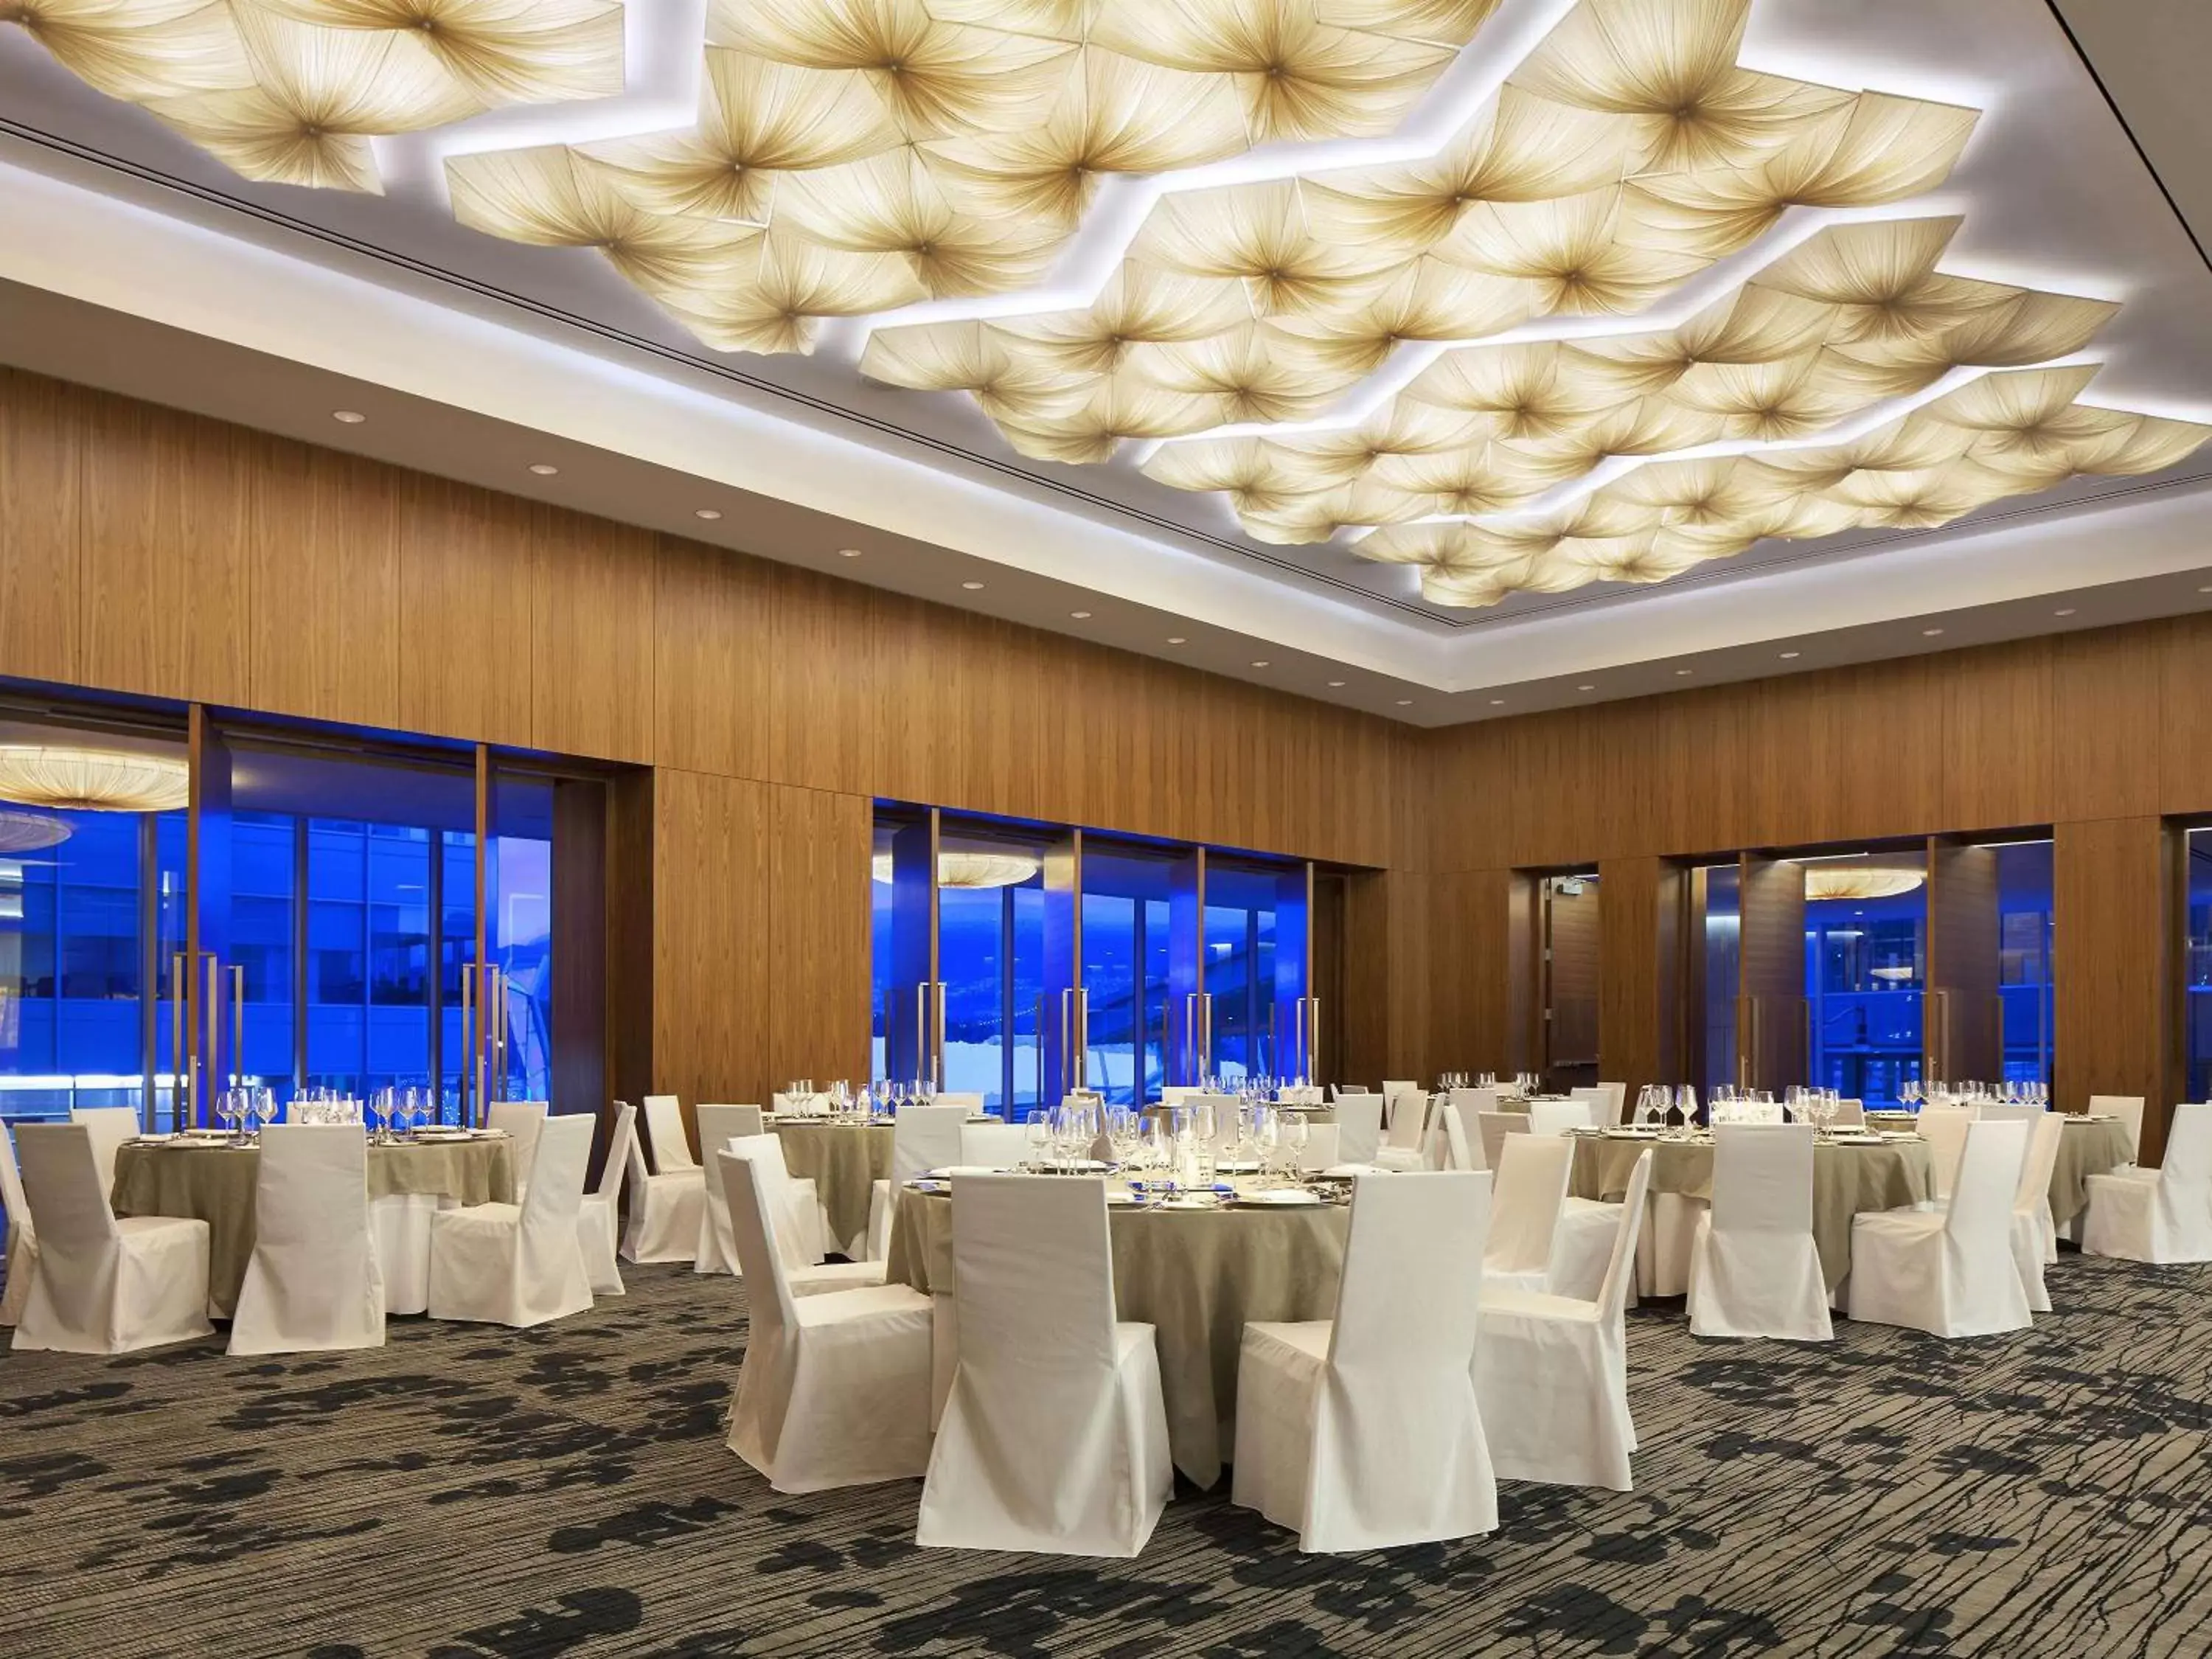 Meeting/conference room, Banquet Facilities in Fairmont Pacific Rim